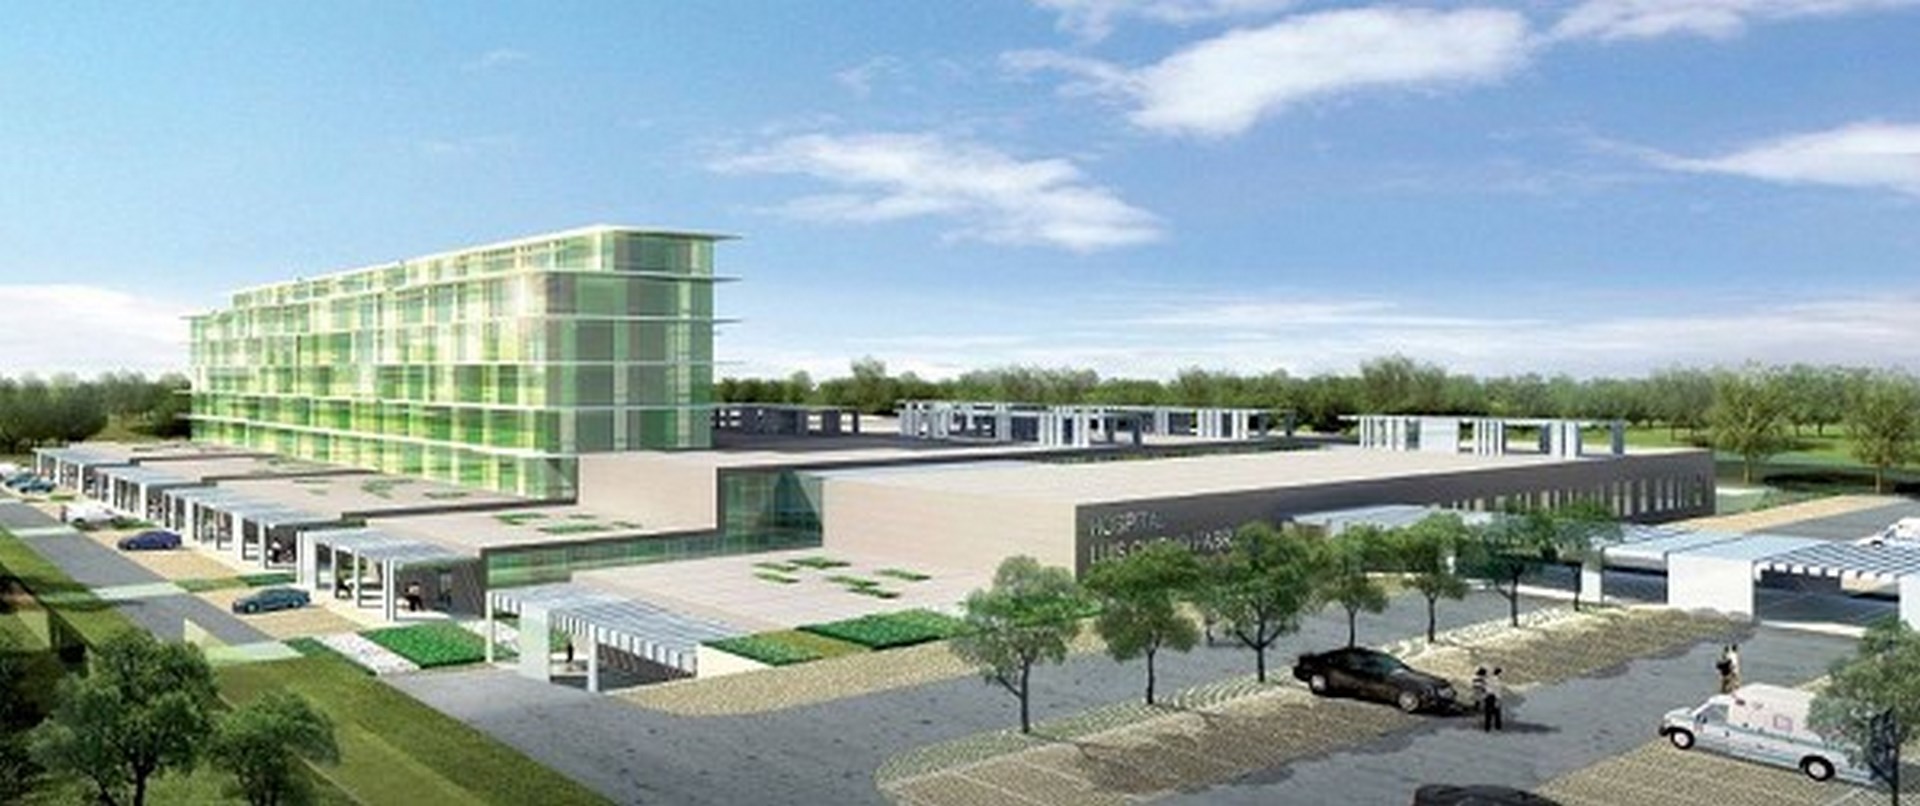 Artist’s impression of the new hospital